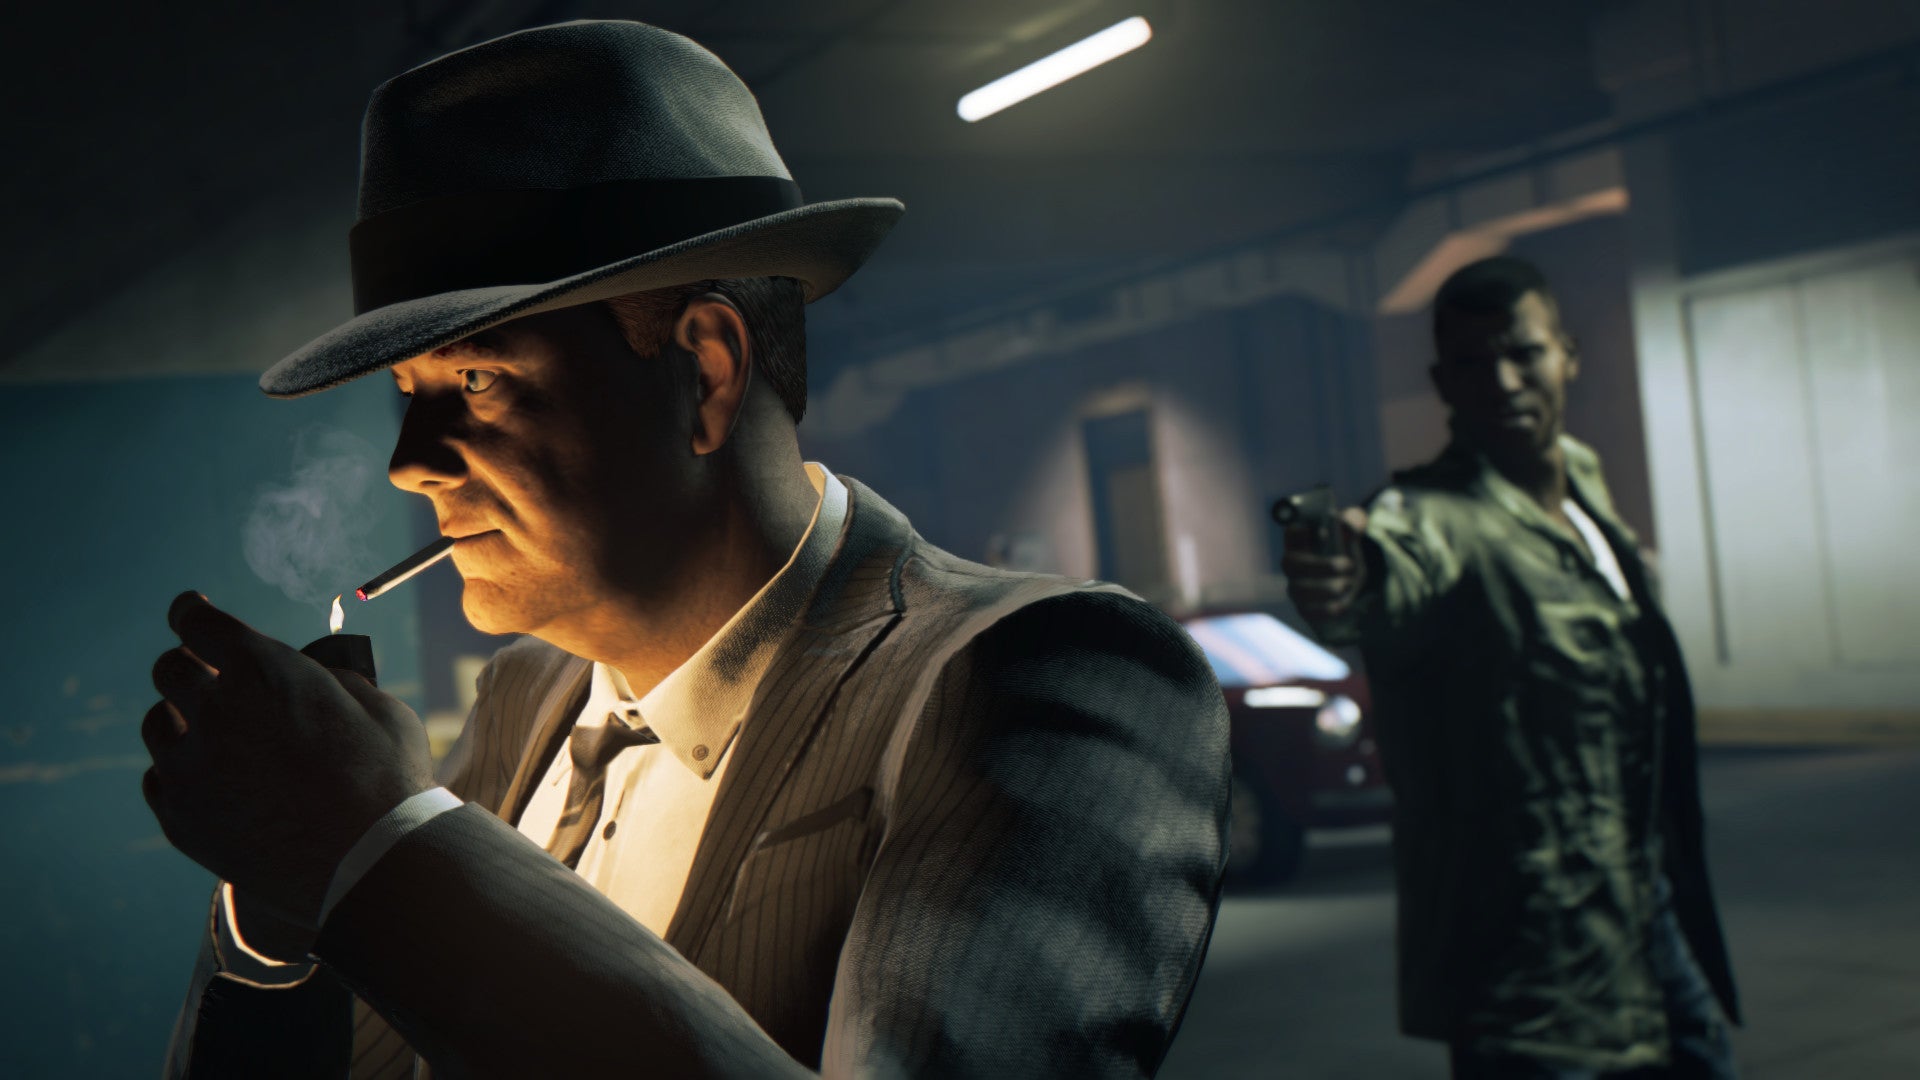 Image for Mafia 3 developer Hangar 13 suffers another round of layoffs